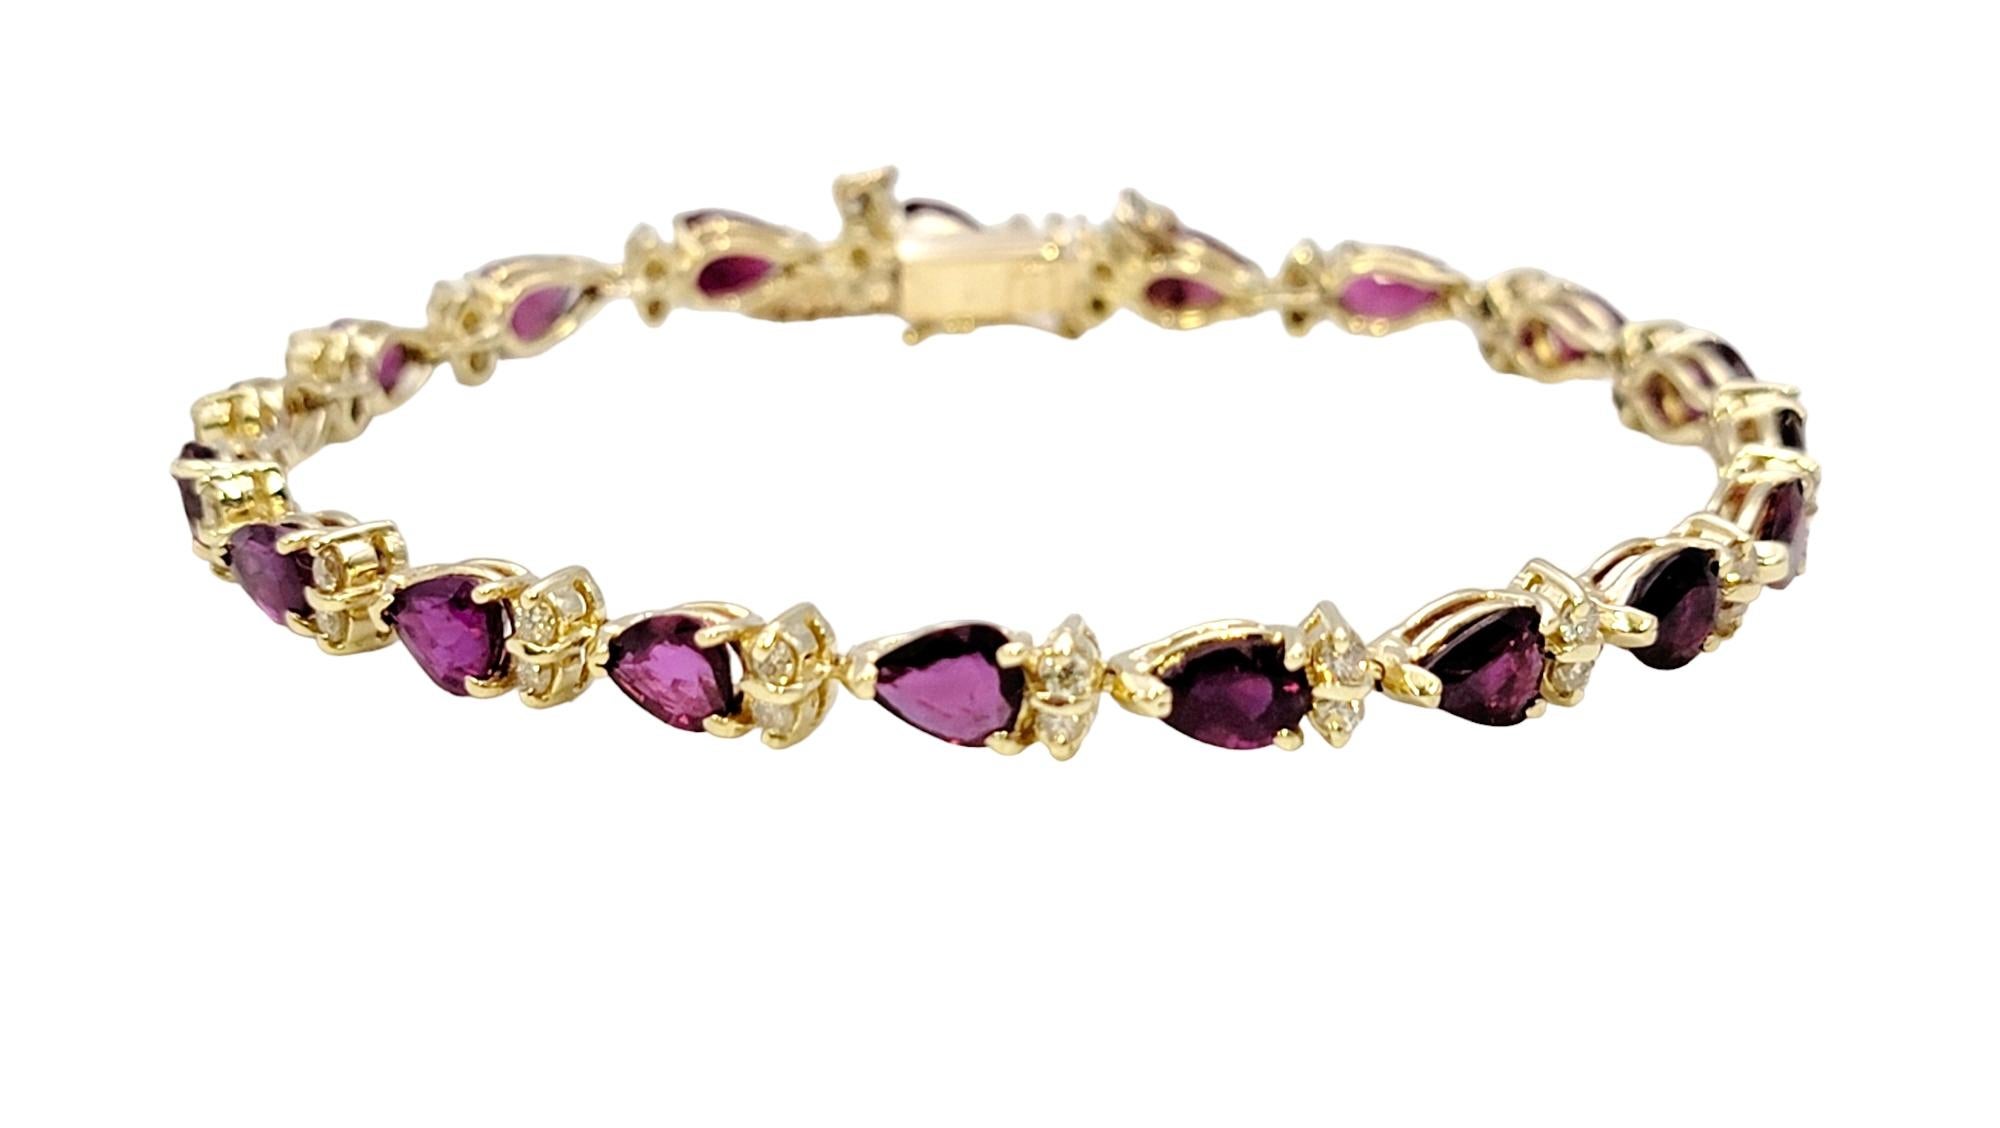 Stunning line bracelet with a vibrant pop of color. This gorgeous piece absolutely dazzles with its rich red rubies and bright white diamonds. The sleek design paired with the alternating pattern gives both interest and beauty to this exquisite